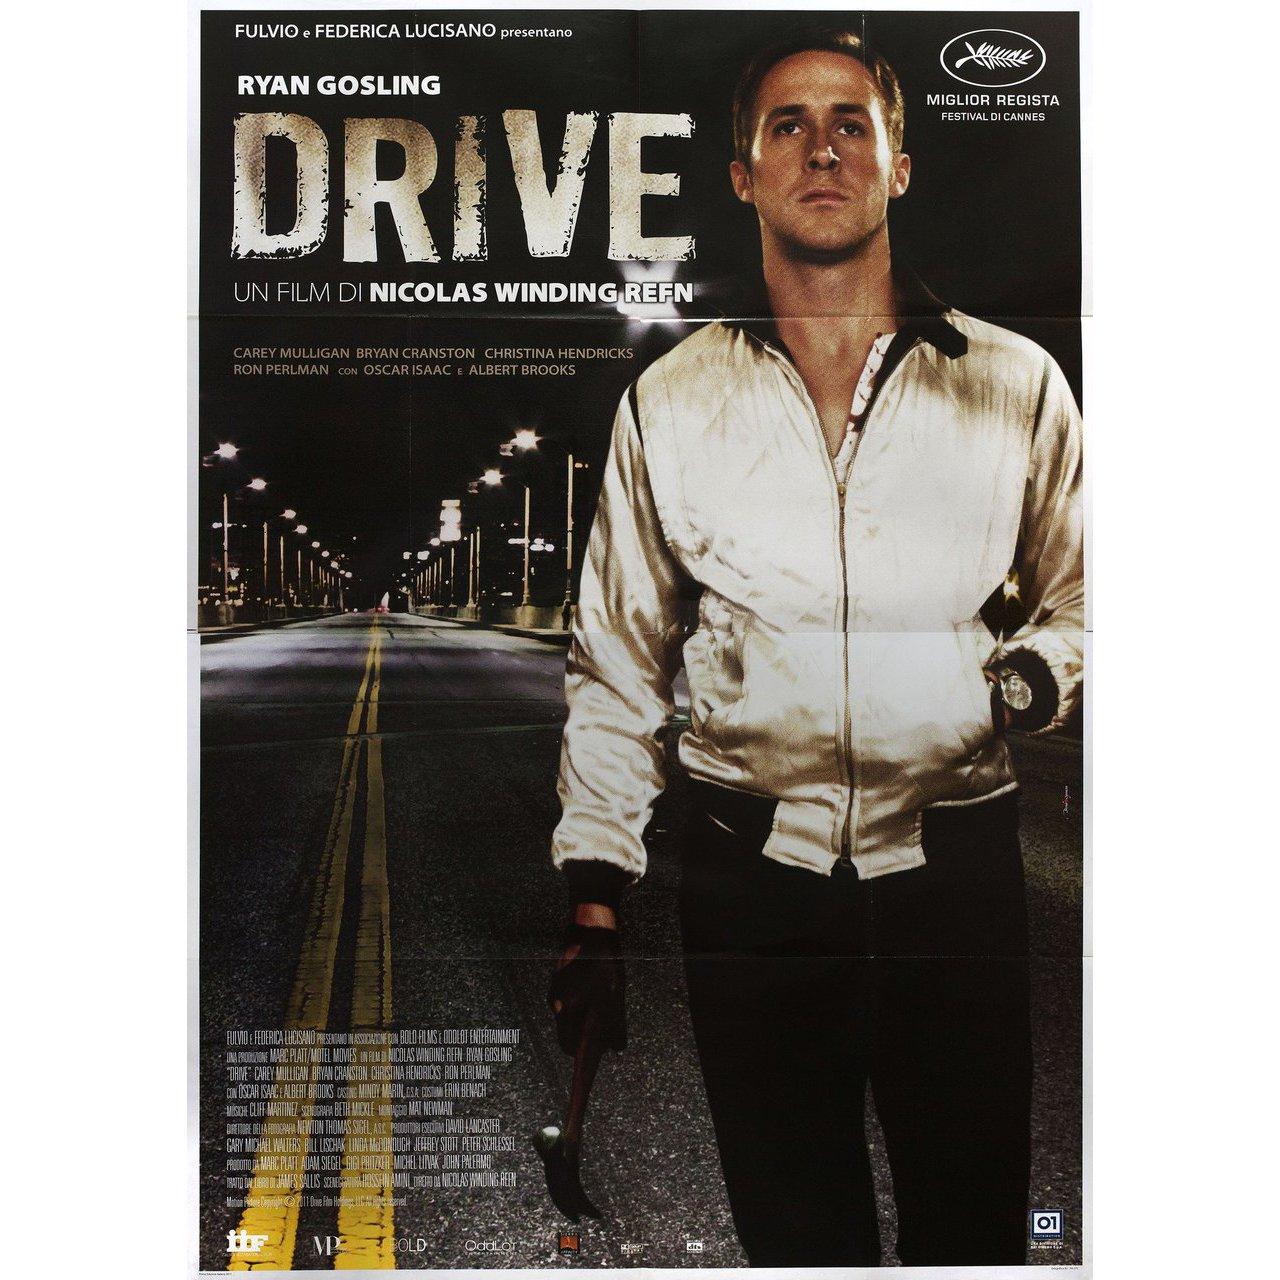 Original 2011 Italian quattro fogli poster for the film Drive directed by Nicolas Winding Refn with Ryan Gosling / Carey Mulligan / Bryan Cranston / Albert Brooks. Fine condition, folded. Many original posters were issued folded or were subsequently